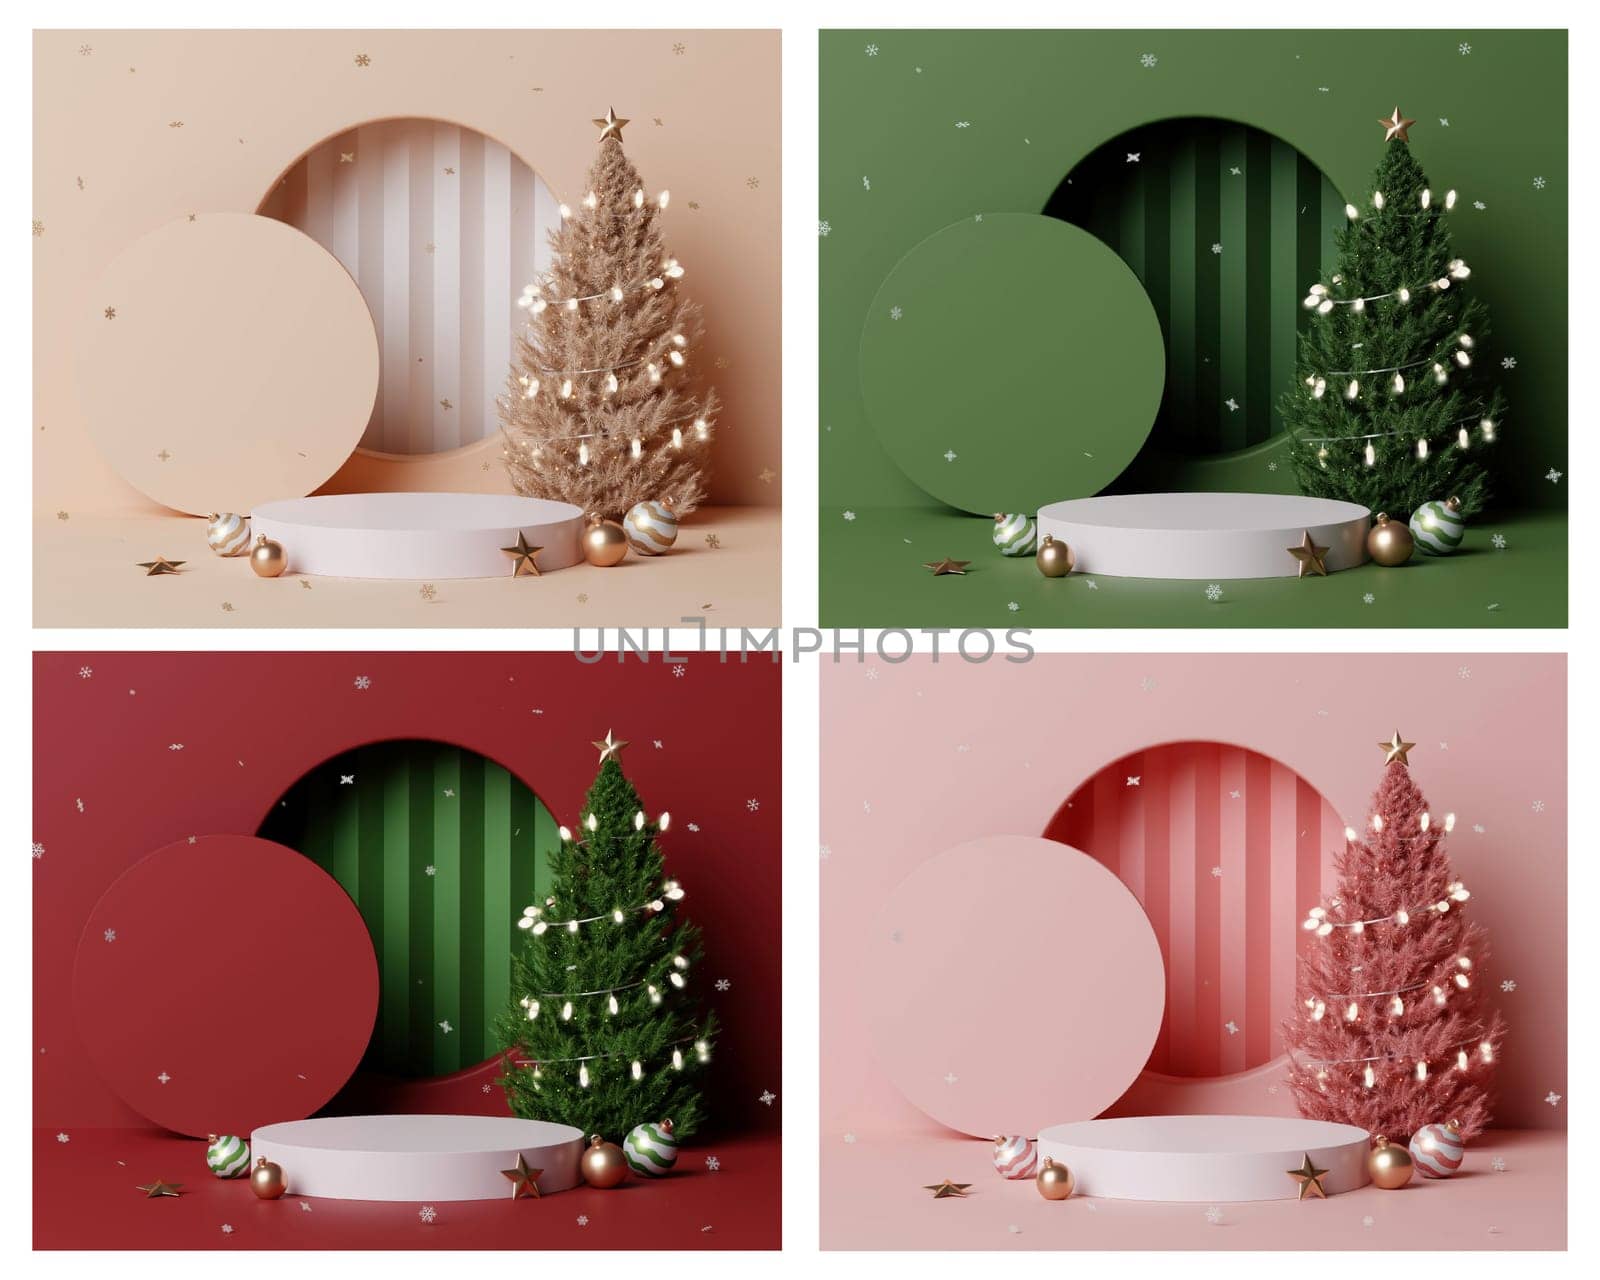 3d Christmas tree podium. Realistic 3d with 4 design stage podium. Decorative festive elements glass bauble balls. Xmas holiday template podium. by meepiangraphic